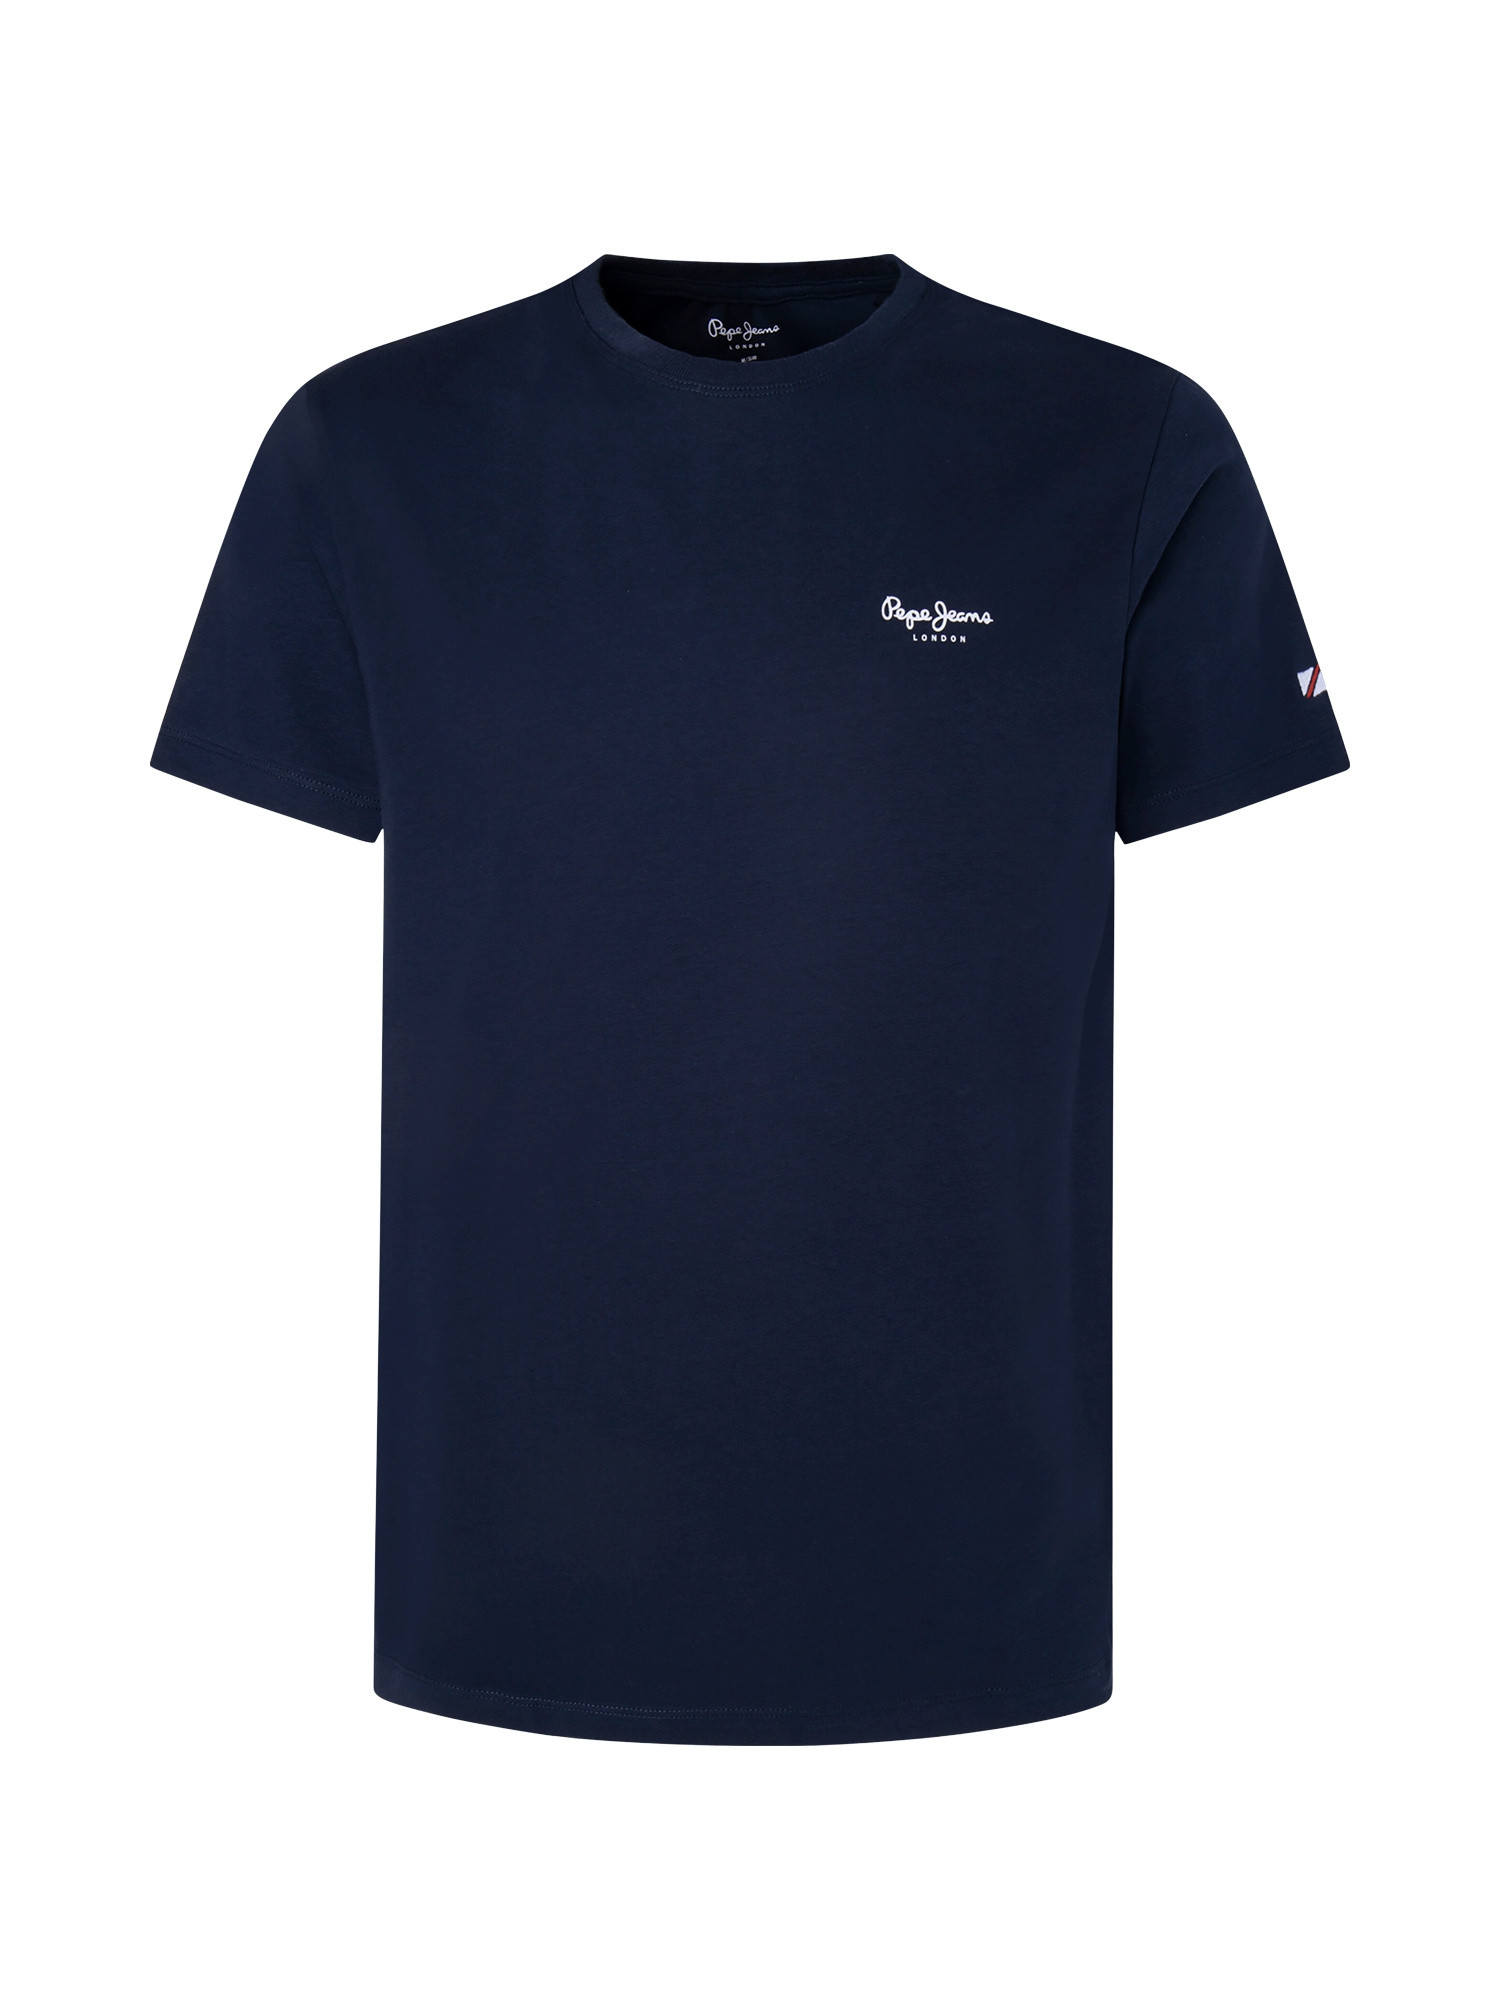 Pepe Jeans - T-shirt con logo ricamato in cotone, Blu scuro, large image number 0